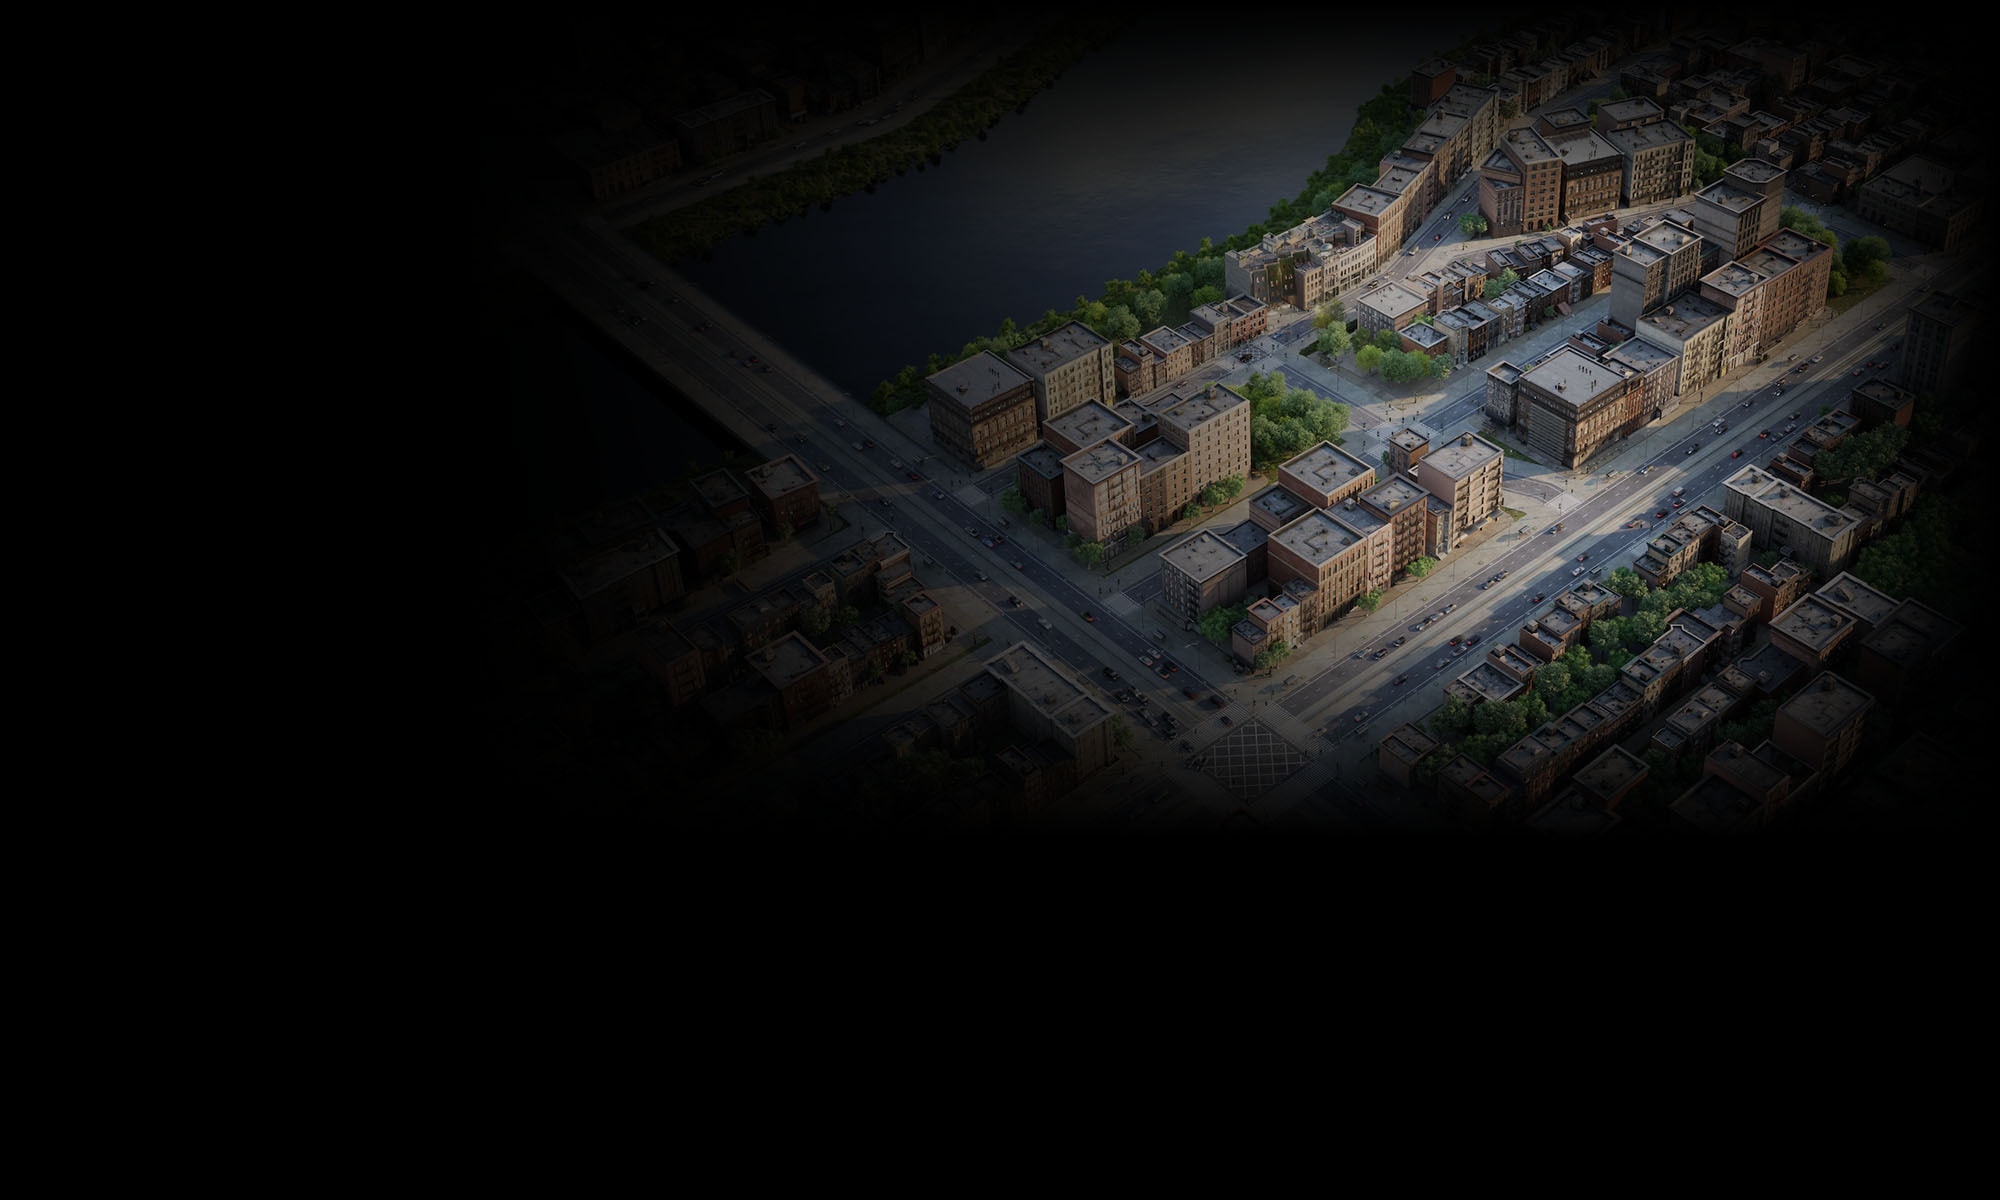 Rendering of a city block created by Twinmotion.